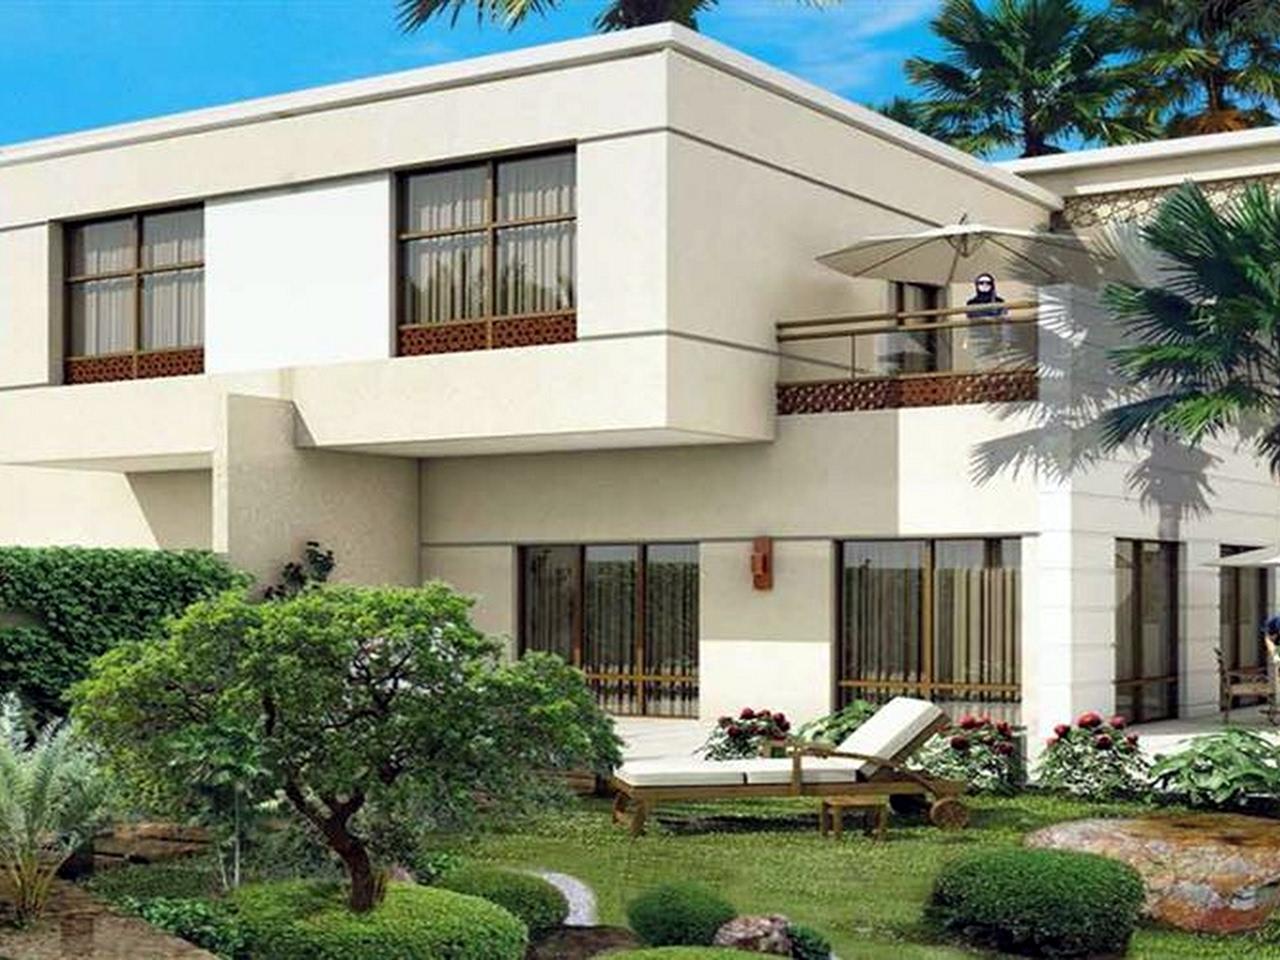 4 bed, 7 bath Villa for sale in Sharjah Garden City, Sharjah for price AED 2100000 